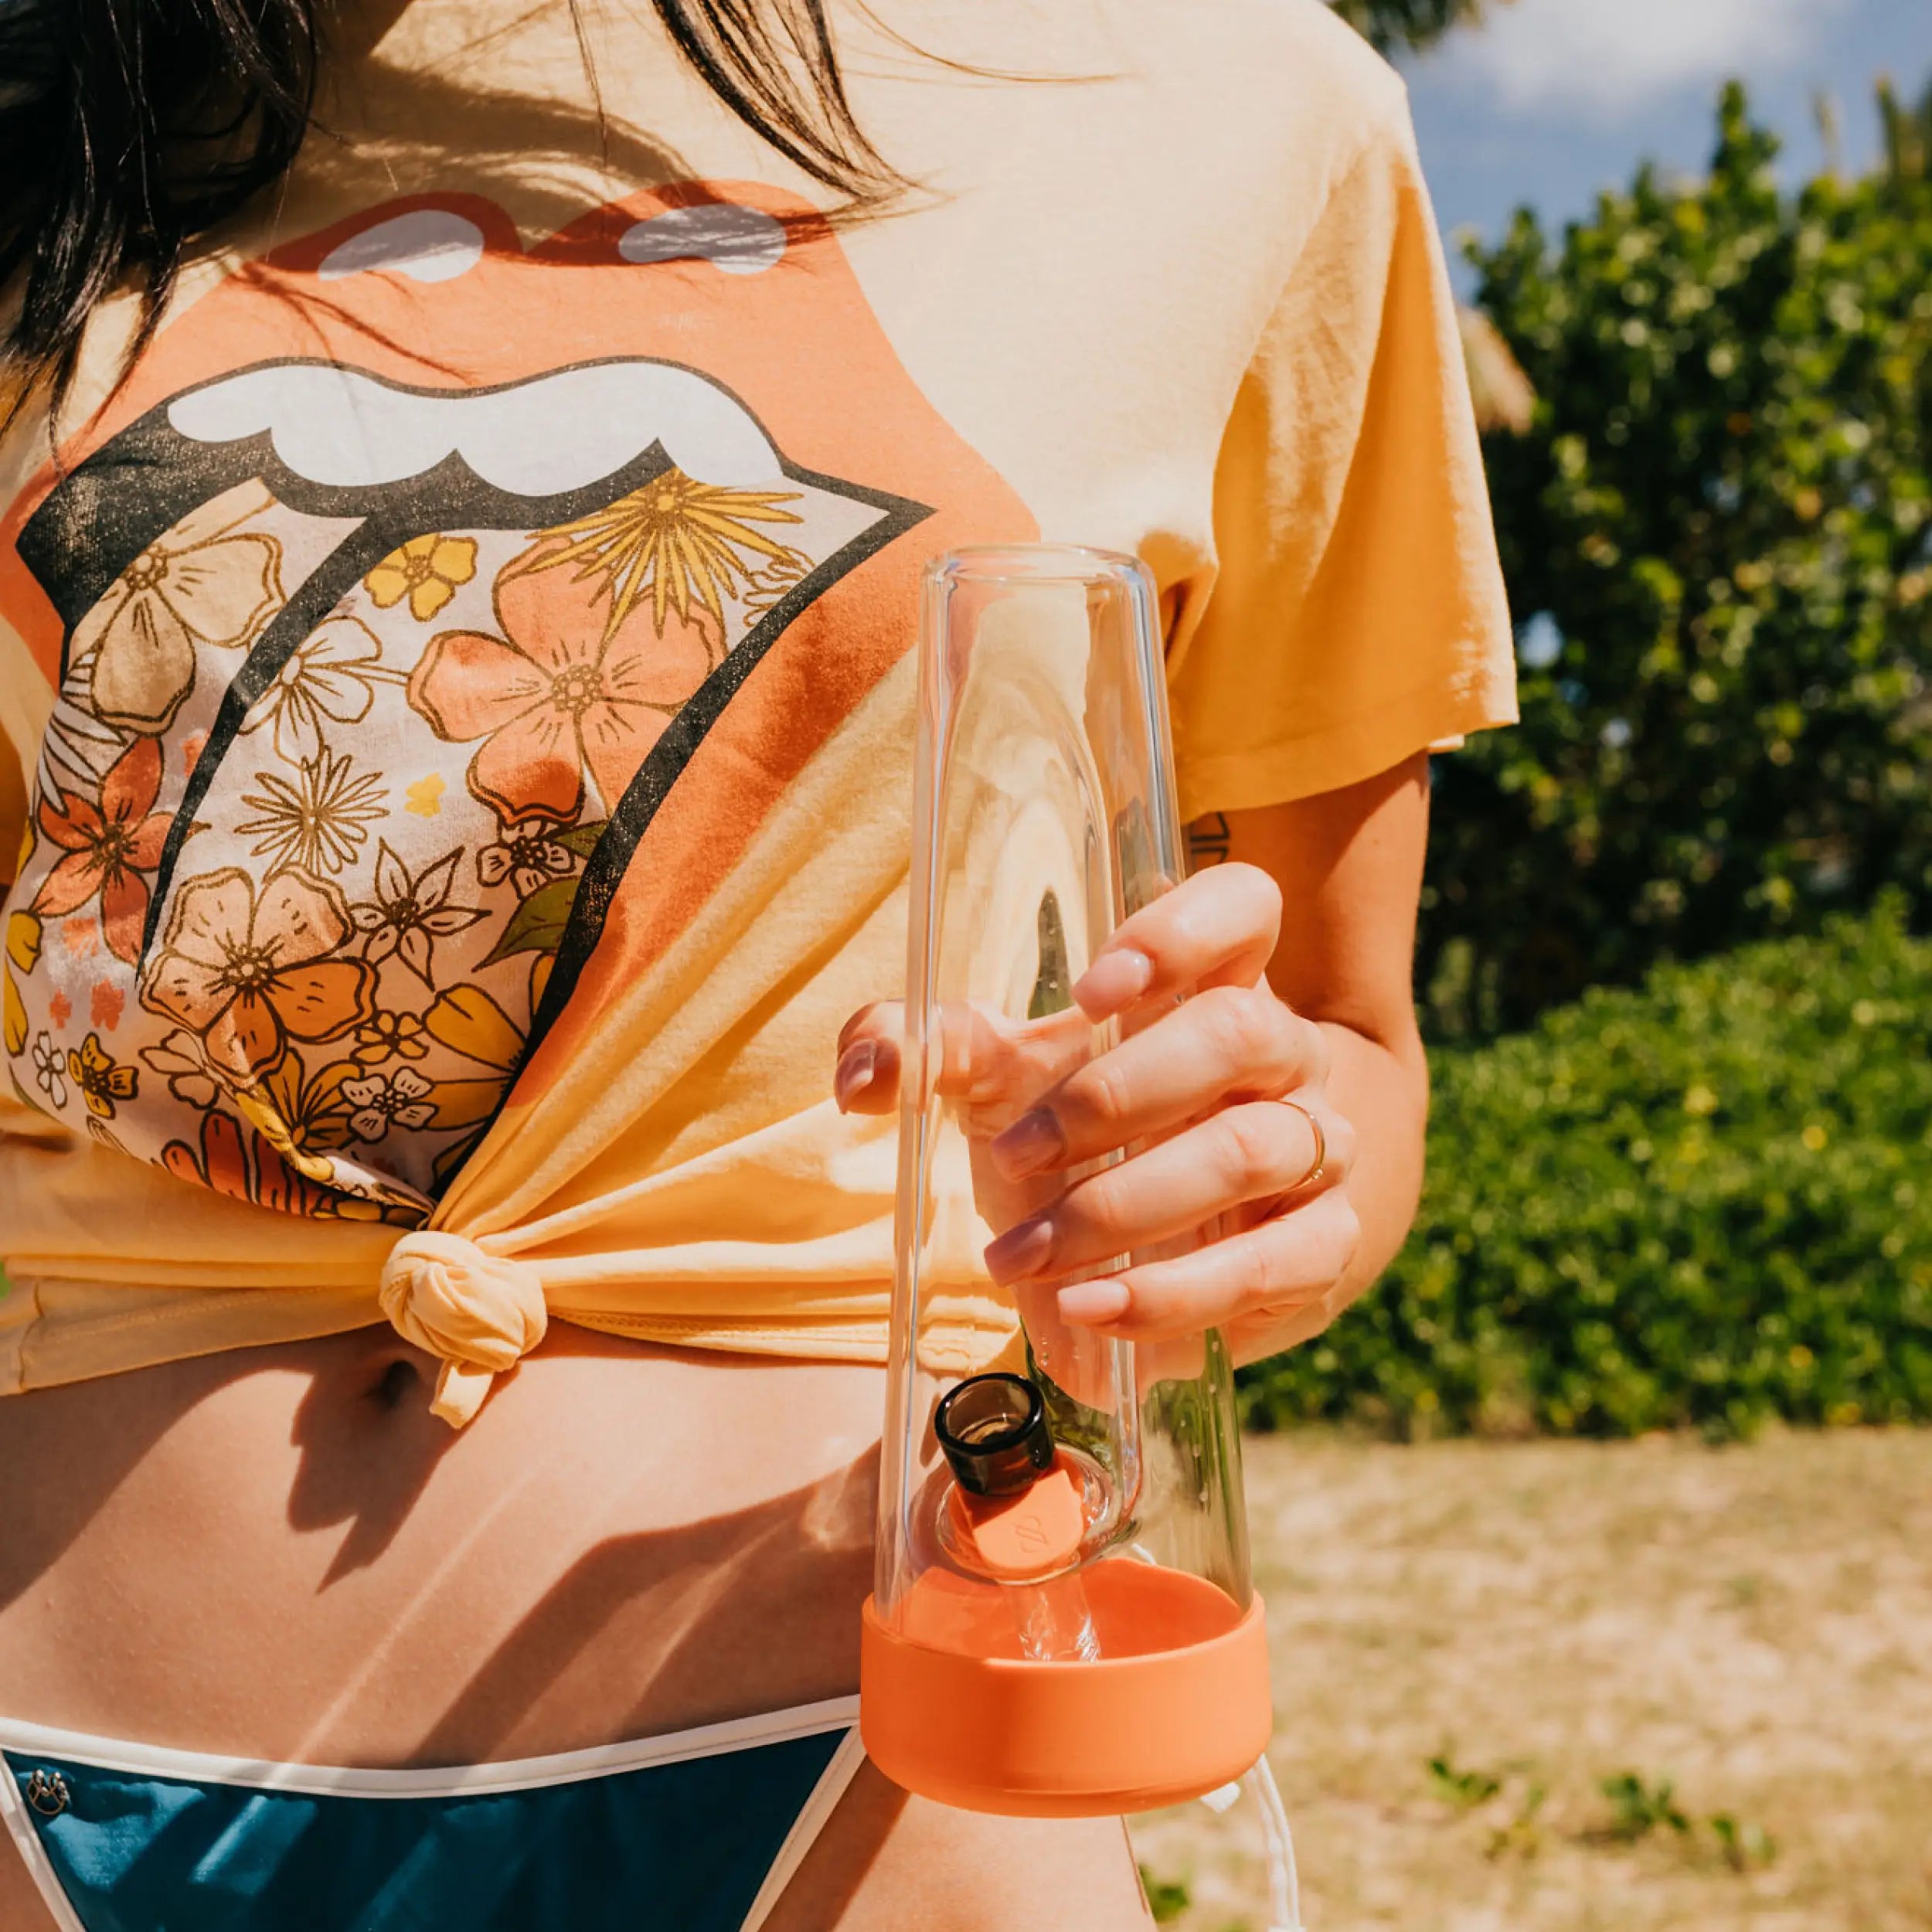 Session's Horizon Orange Bong - A Pop of Color in Relaxation.